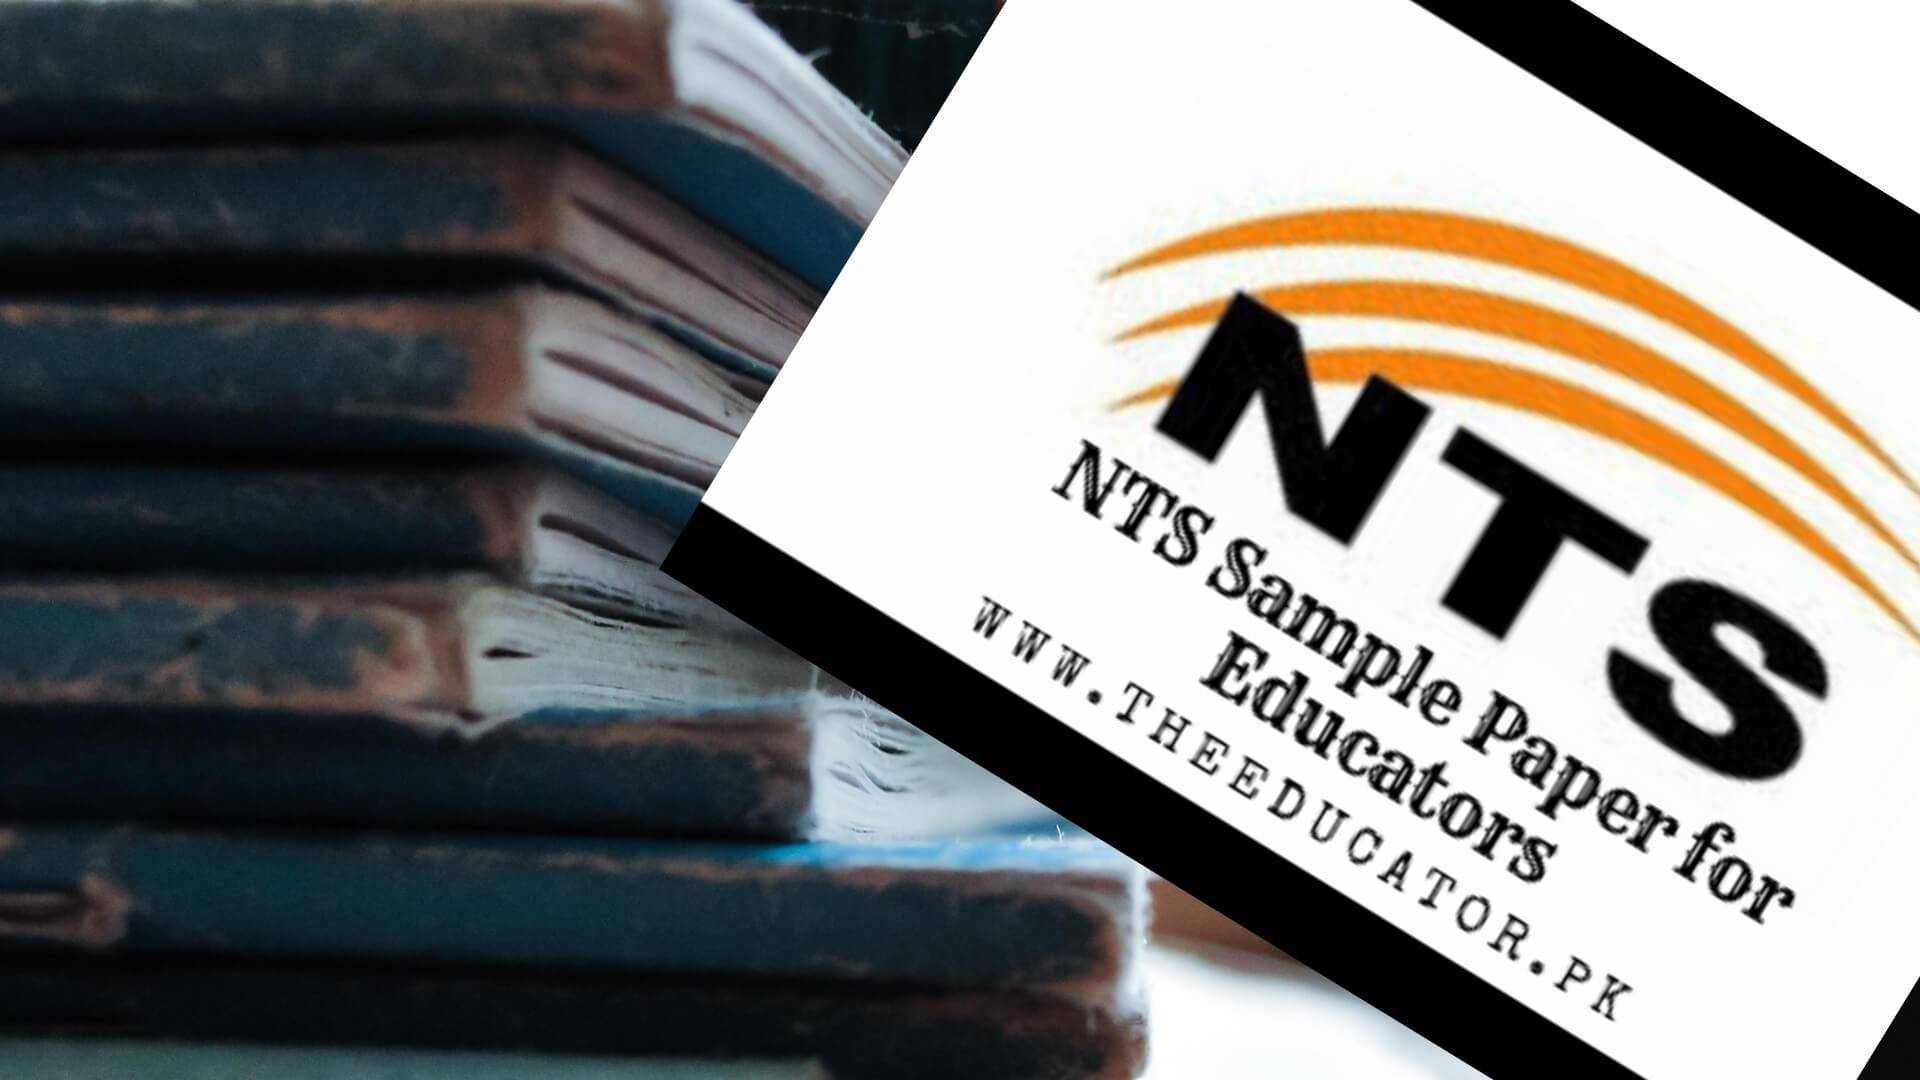 nts solved papers for teachers pdf